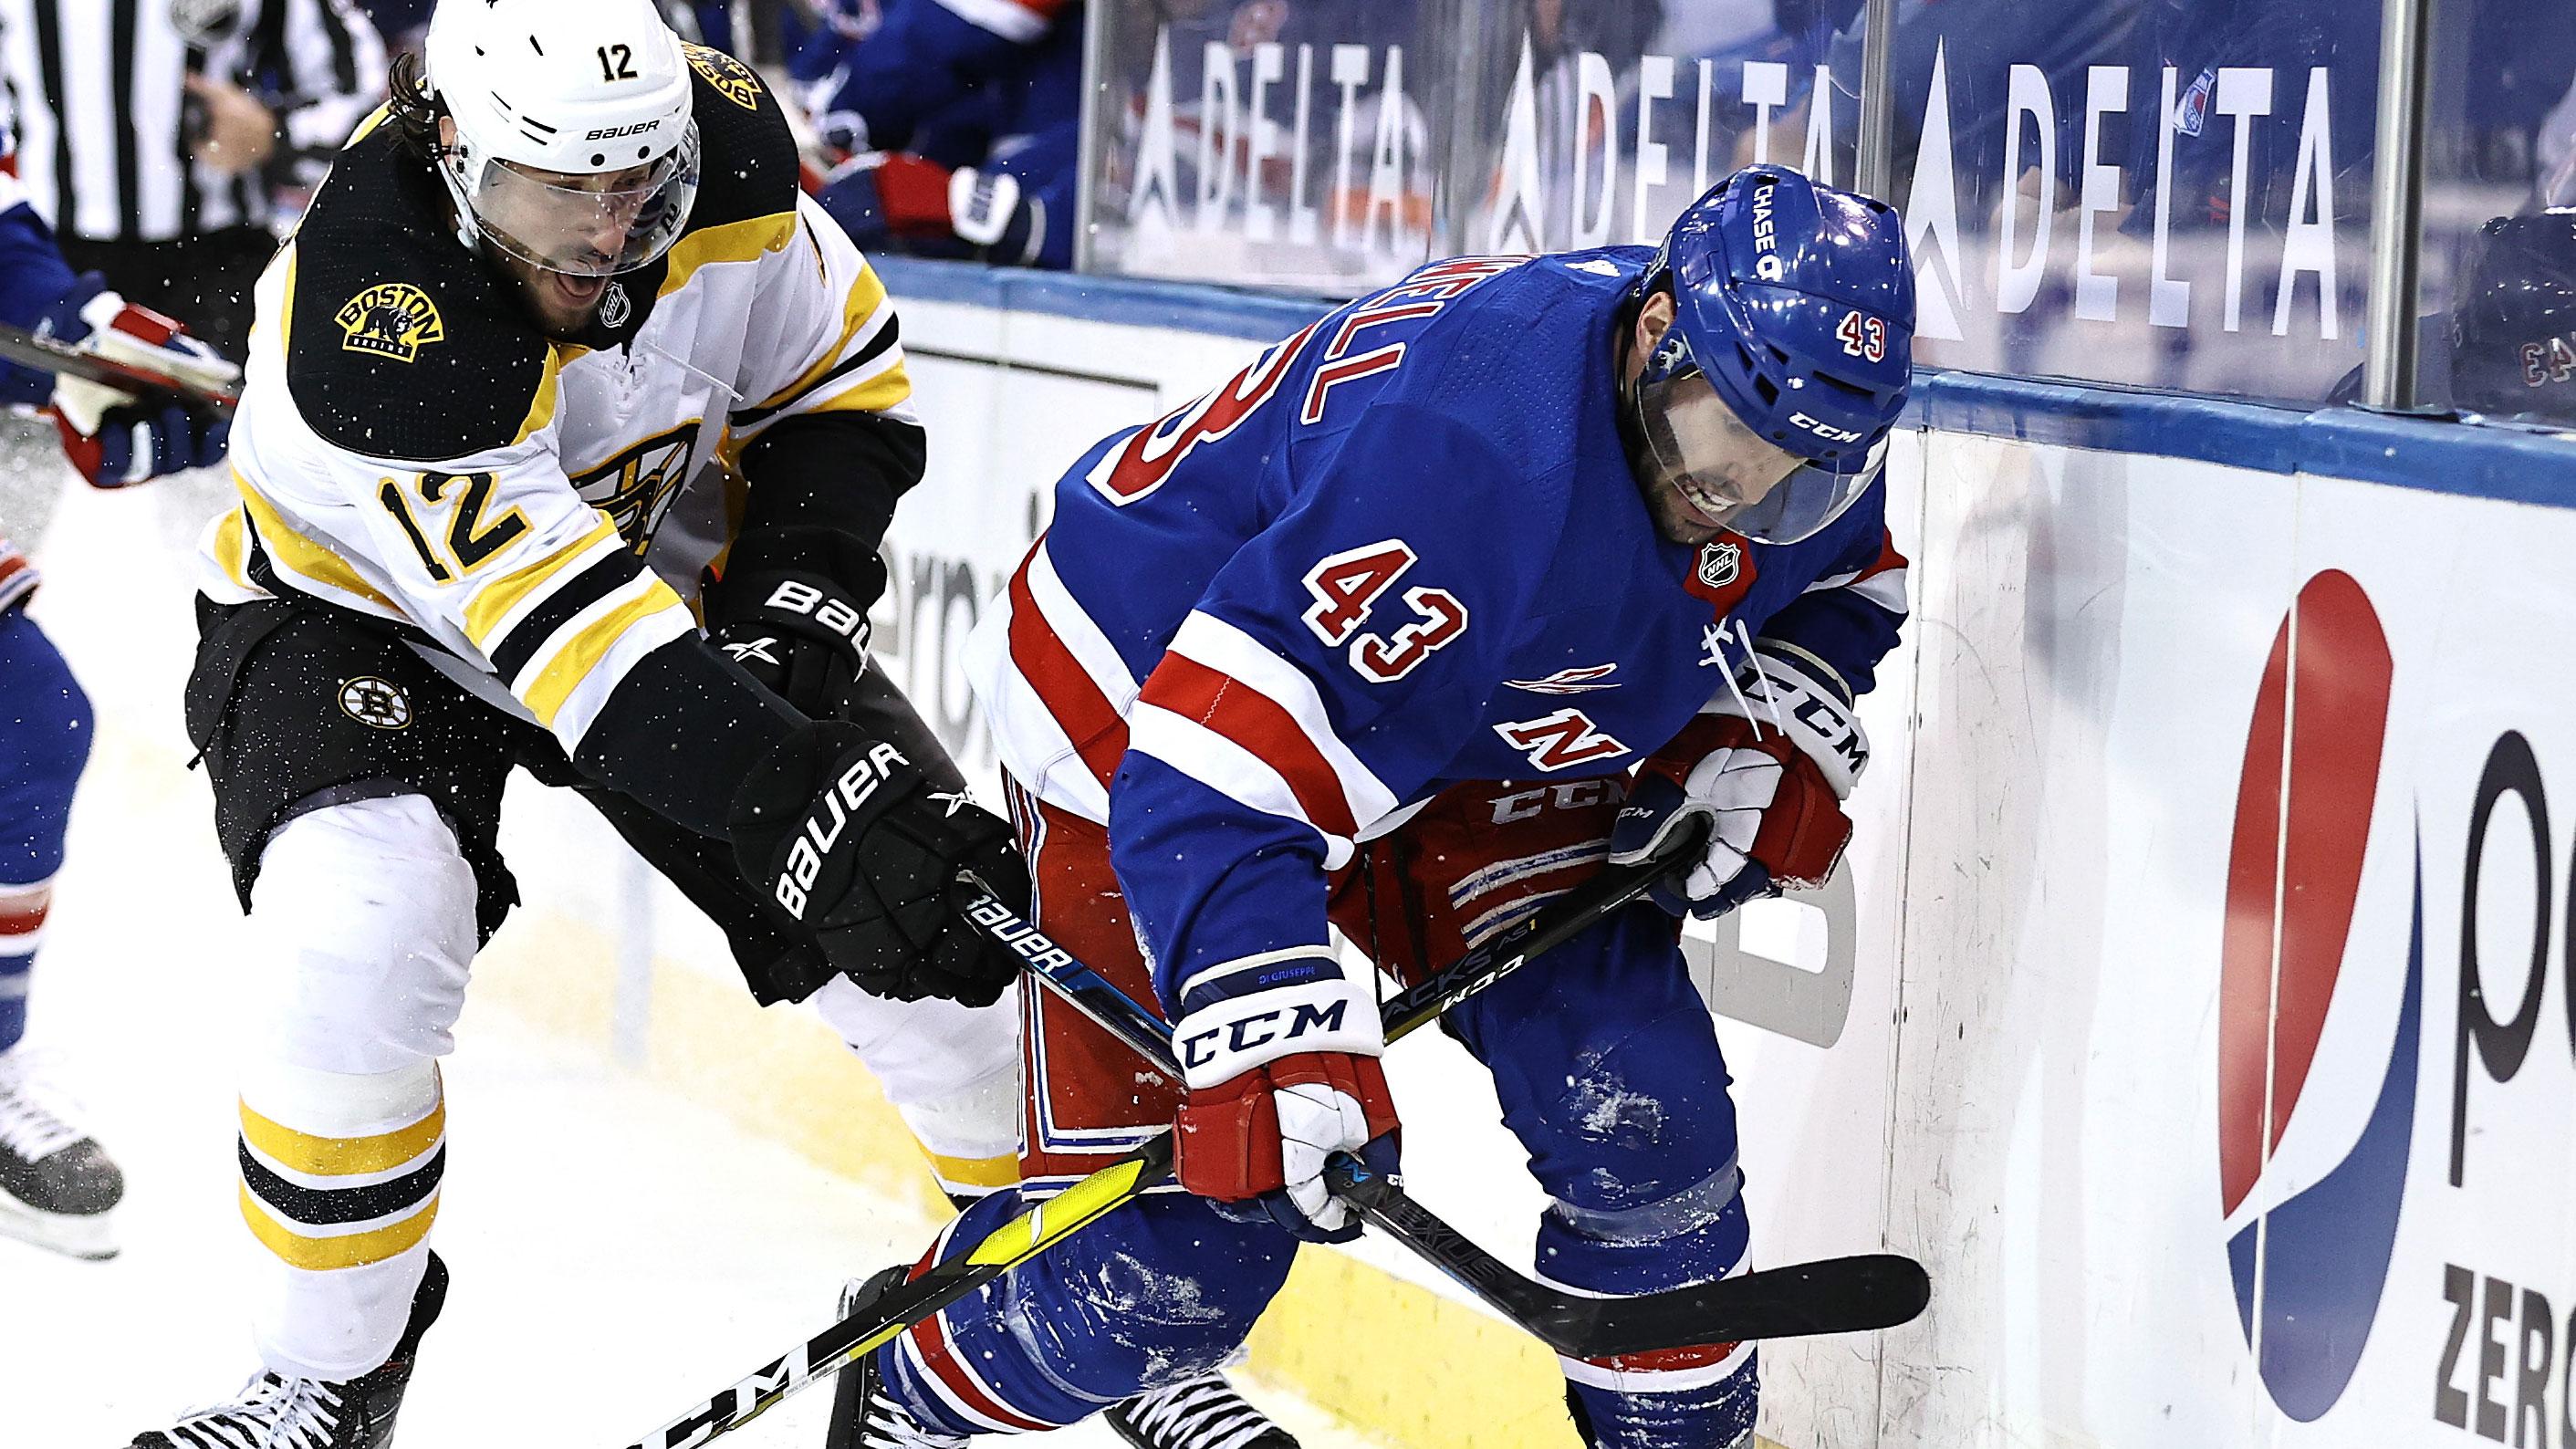 Feb 12, 2021; New York, New York, USA; Boston Bruins right wing Craig Smith (12) and New York Rangers center Colin Blackwell (43) fight for the puck in the first period at Madison Square Garden. / Elsa/Pool Photos-USA TODAY Sports